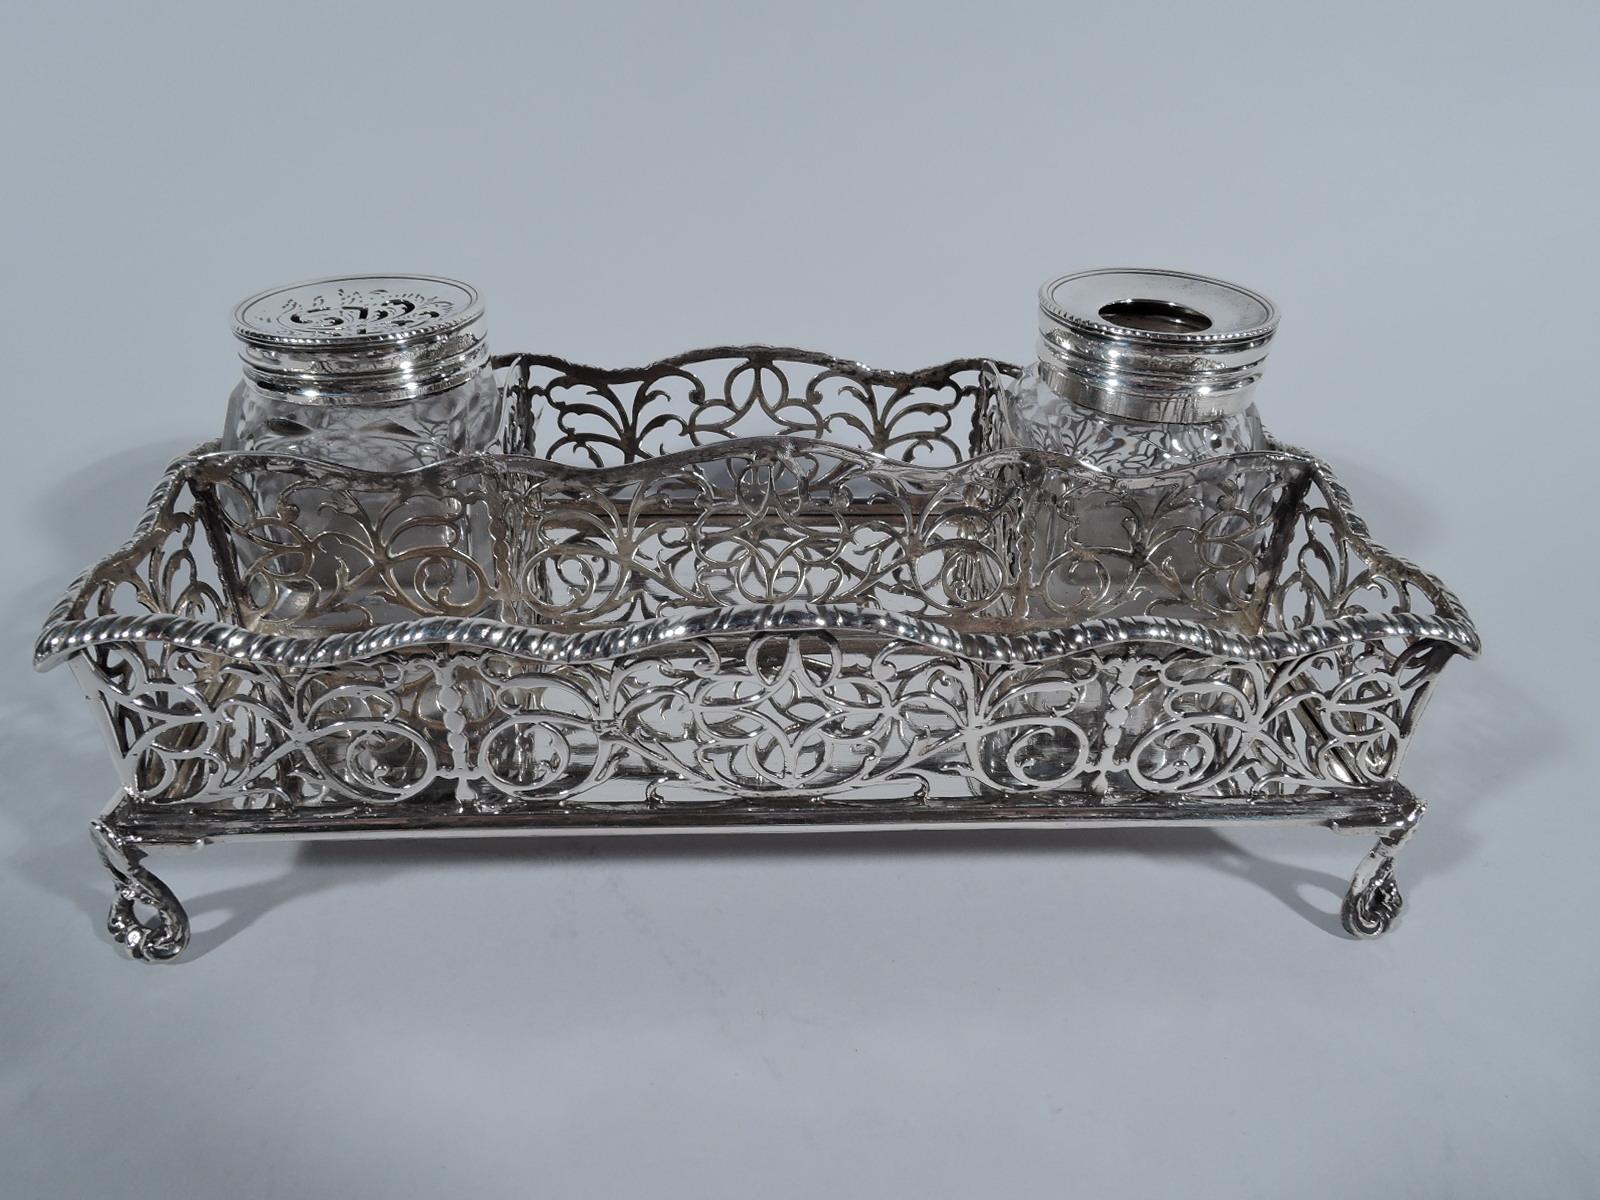 George III sterling silver inkstand. Made by William Plummer in London in 1768. Rectangular with wavy and ornamental open partitions mounted to solid rectangle supported by open corner scroll supports. With ink and sand bottles. An archaic gesture